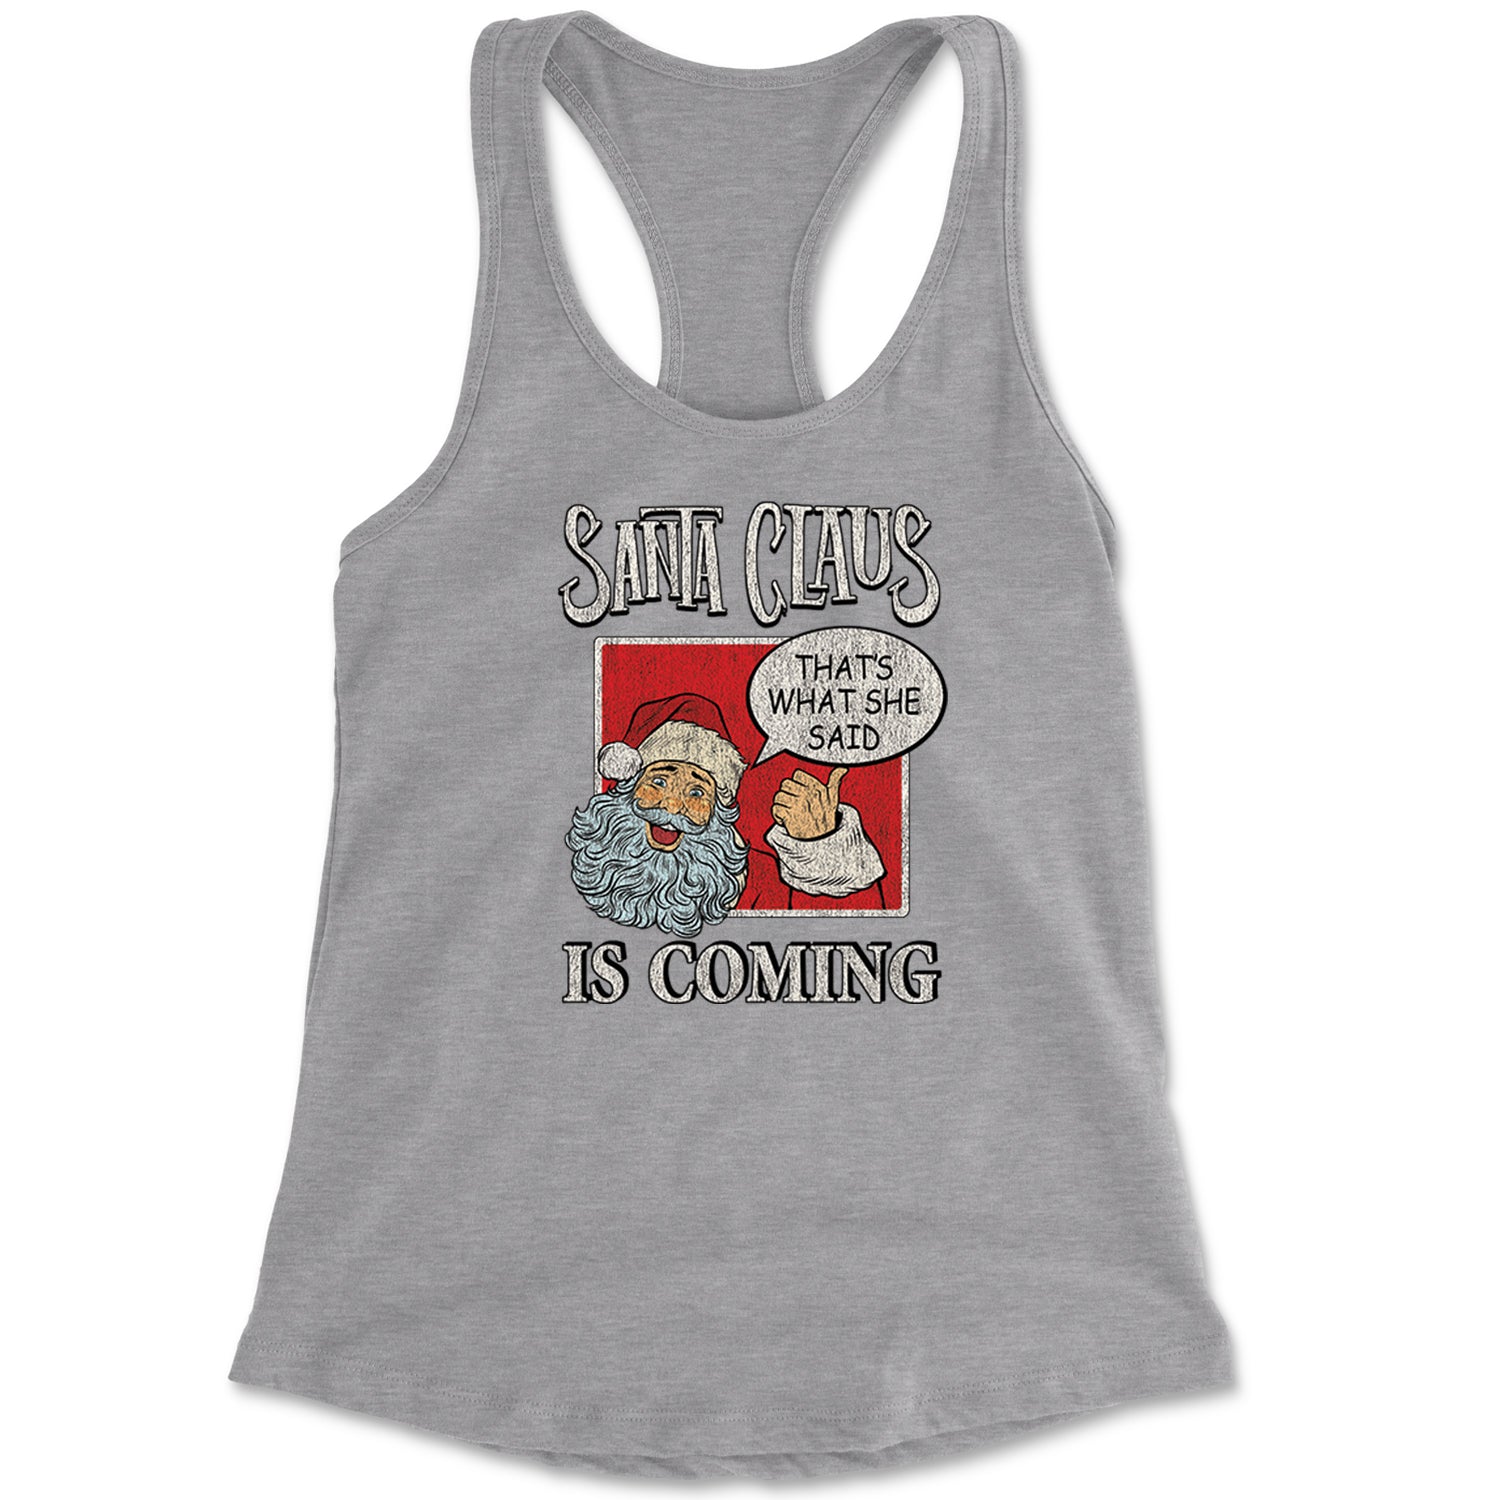 Santa Claus Is Coming - That's What She Said Racerback Tank Top for Women christmas, dunder, holiday, michael, mifflin, office, sweater, ugly, xmas by Expression Tees